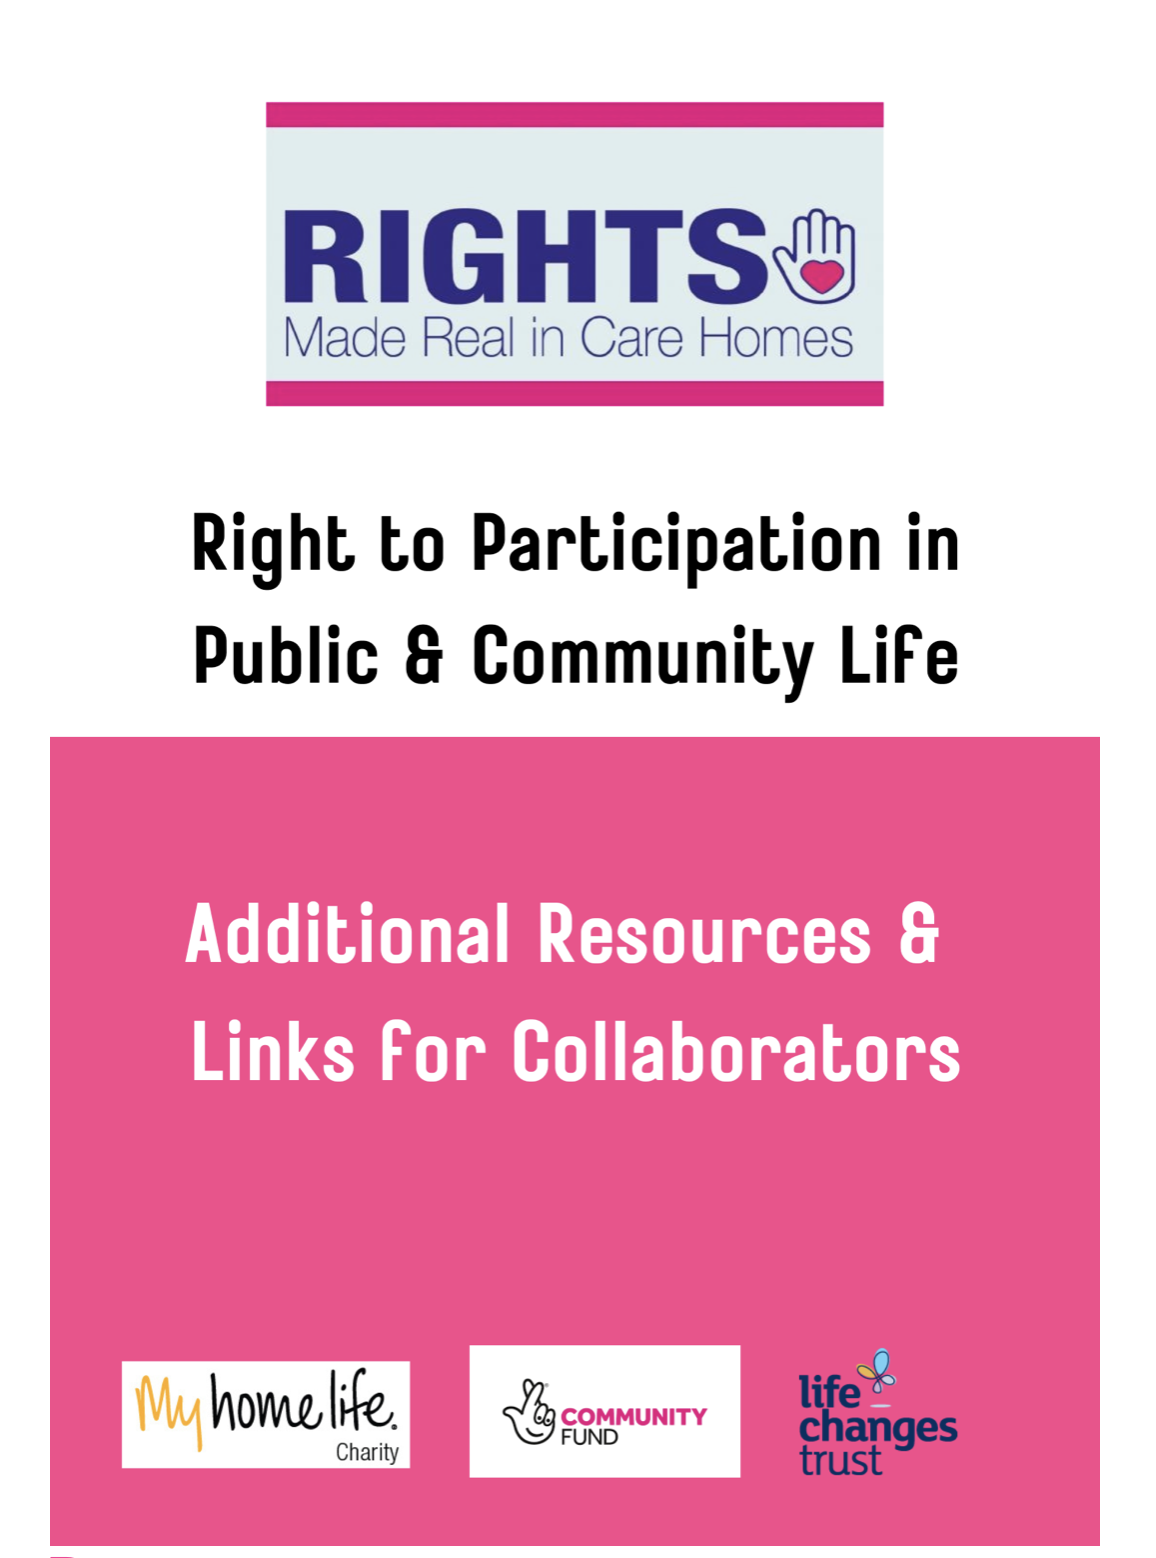 Right to Public & Community Life Links